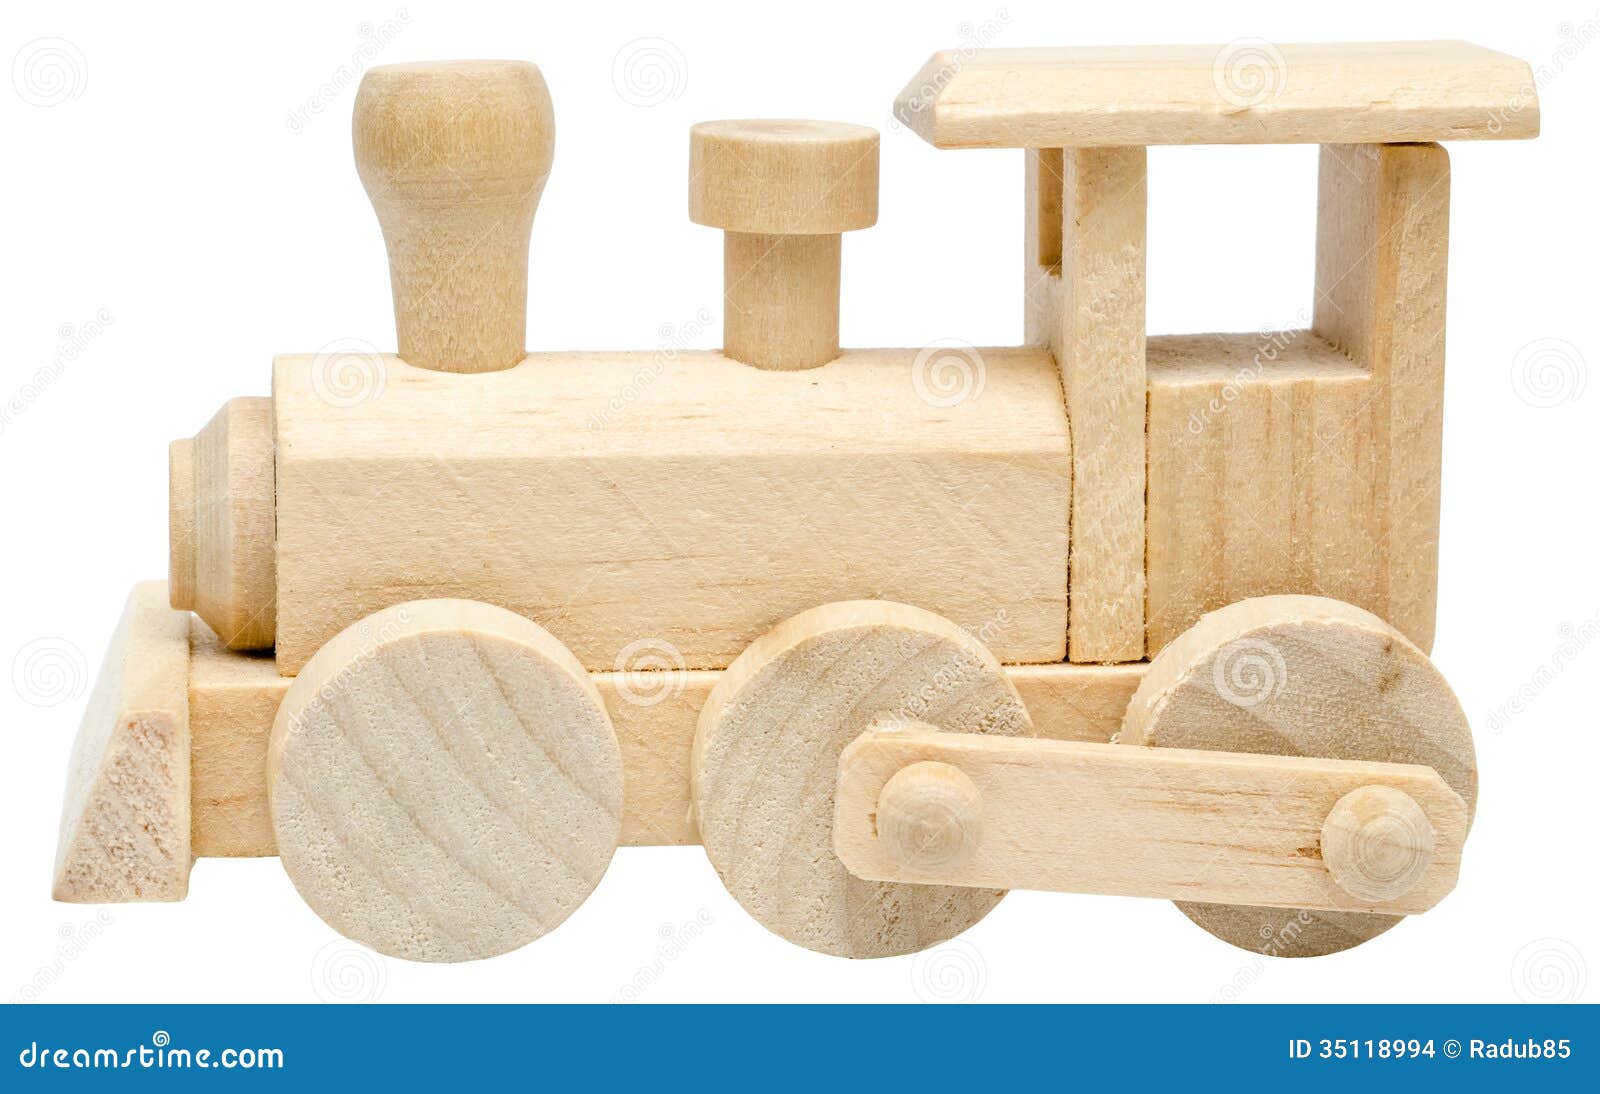 Railway Steam Engine Wooden Toy Stock Images - Image: 35118994